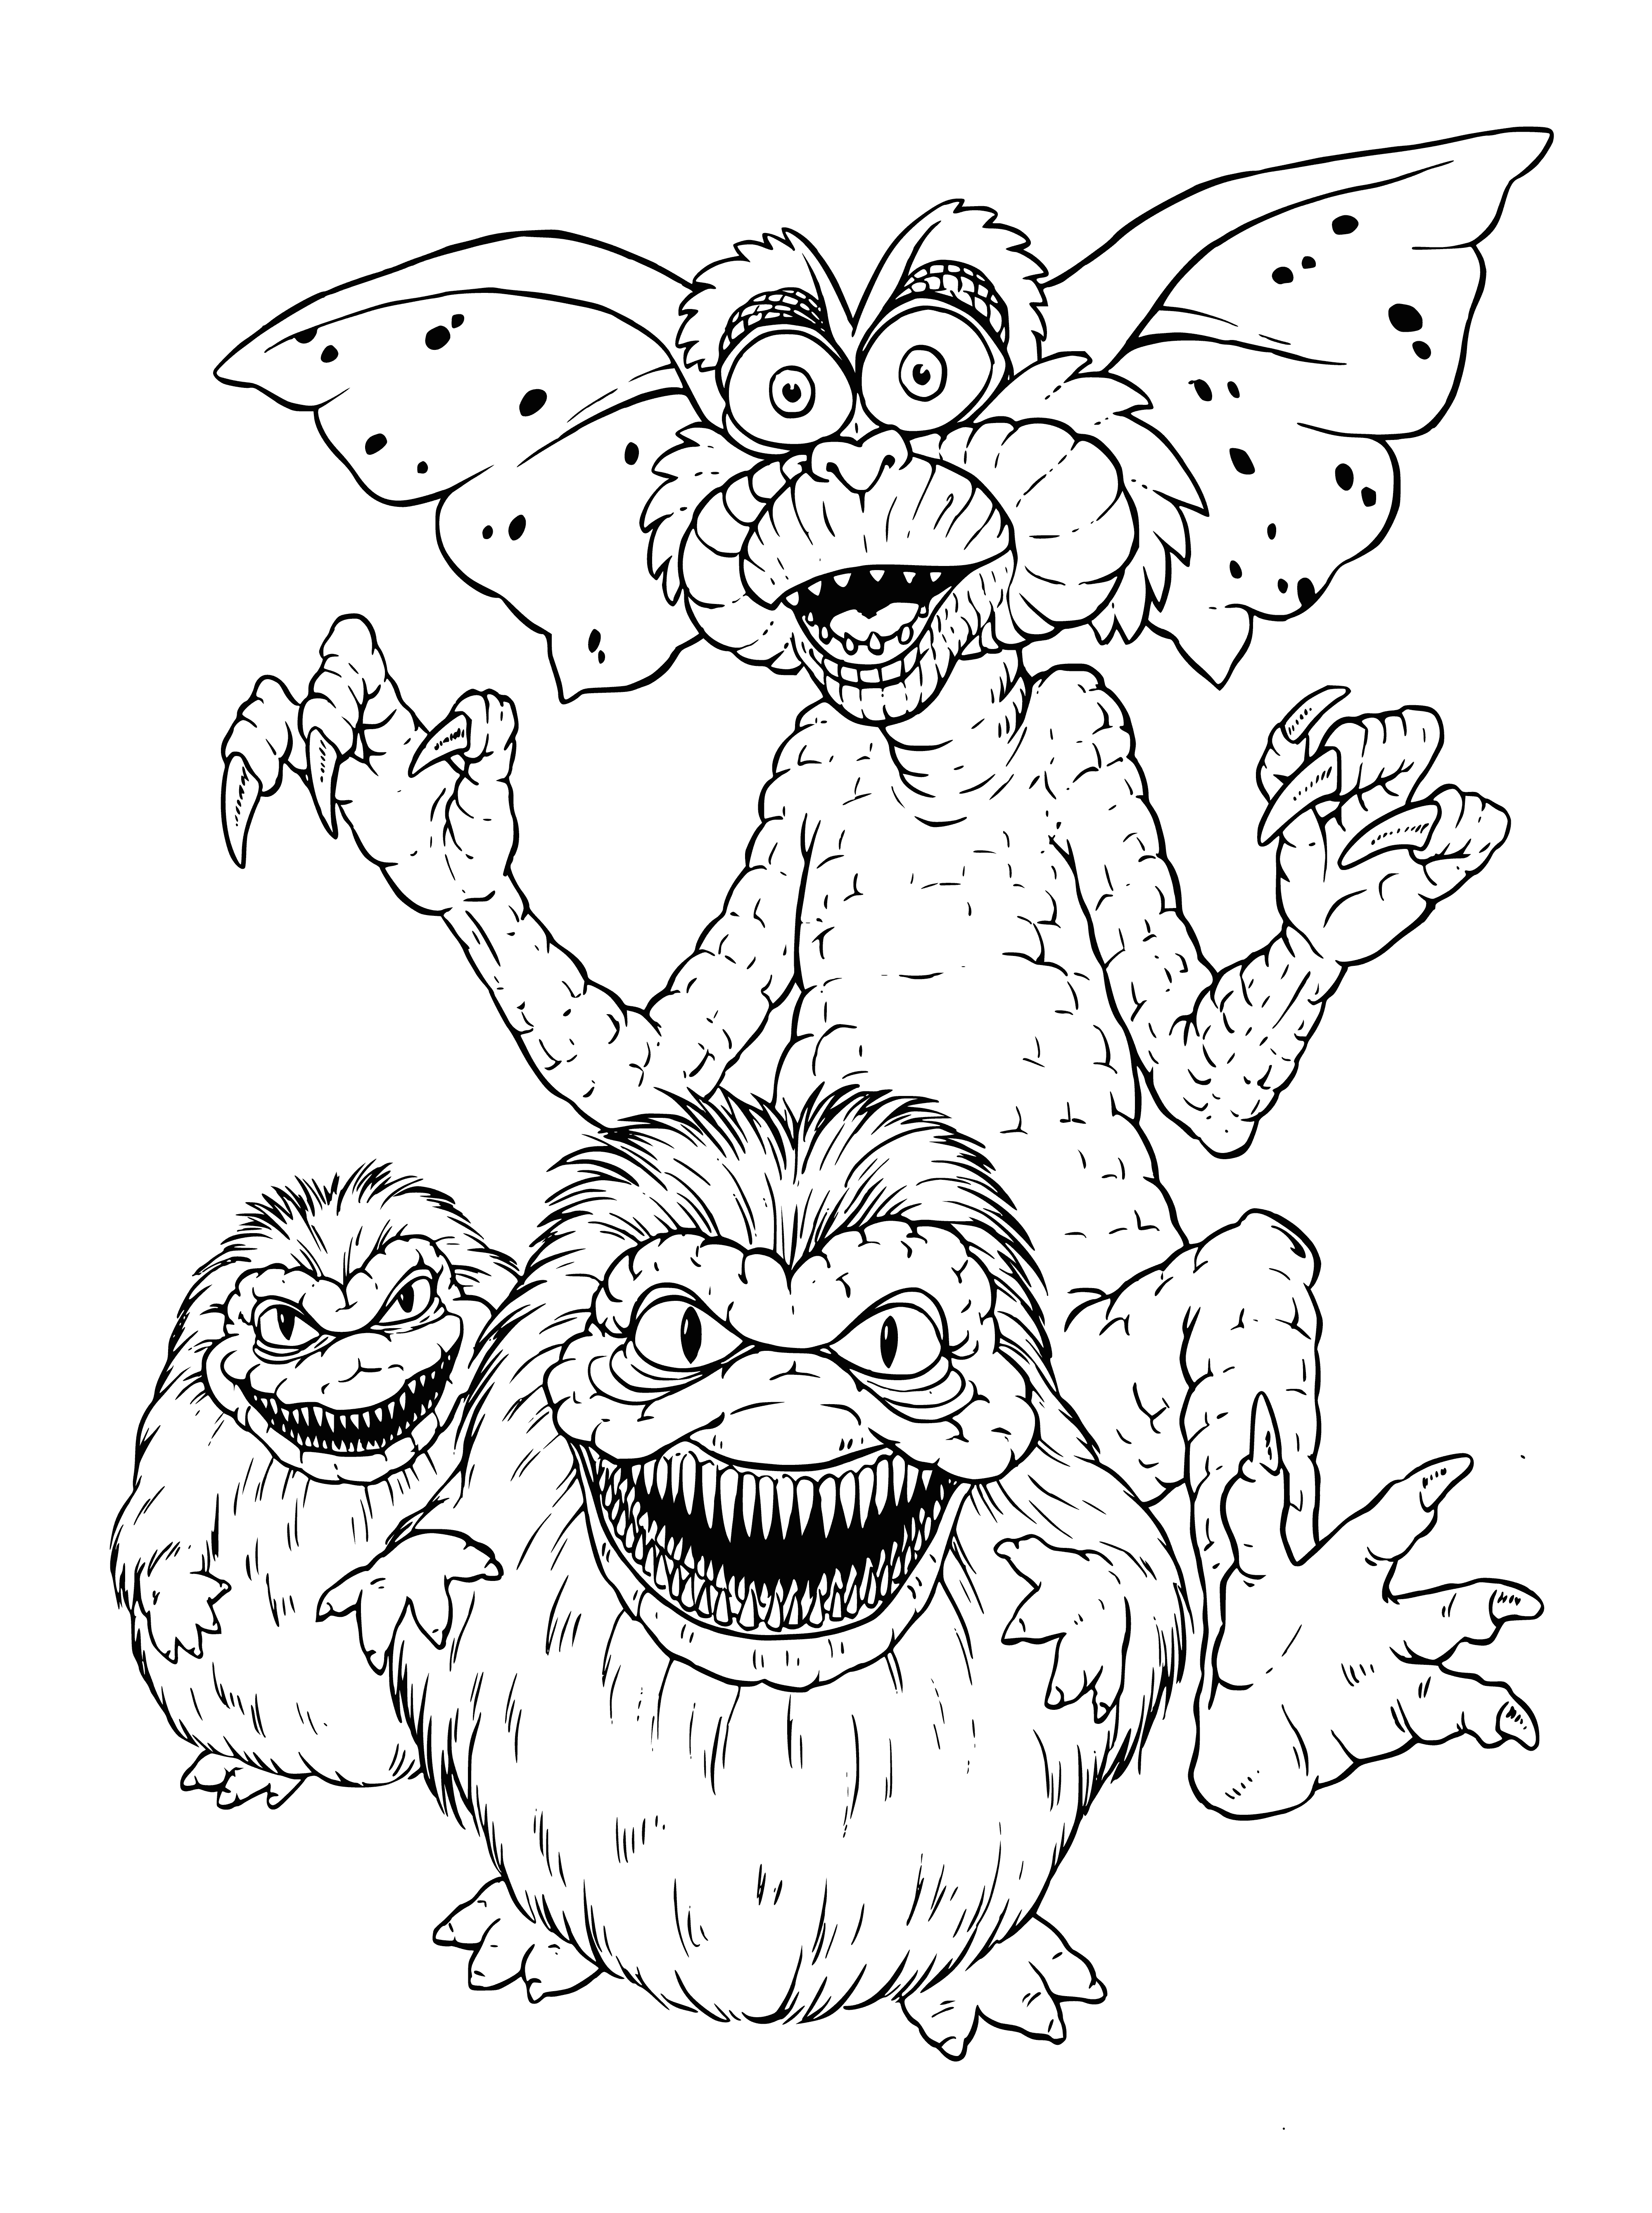 coloring page: Gremlin-like creatures causing chaos, often green with sharp teeth & claws.